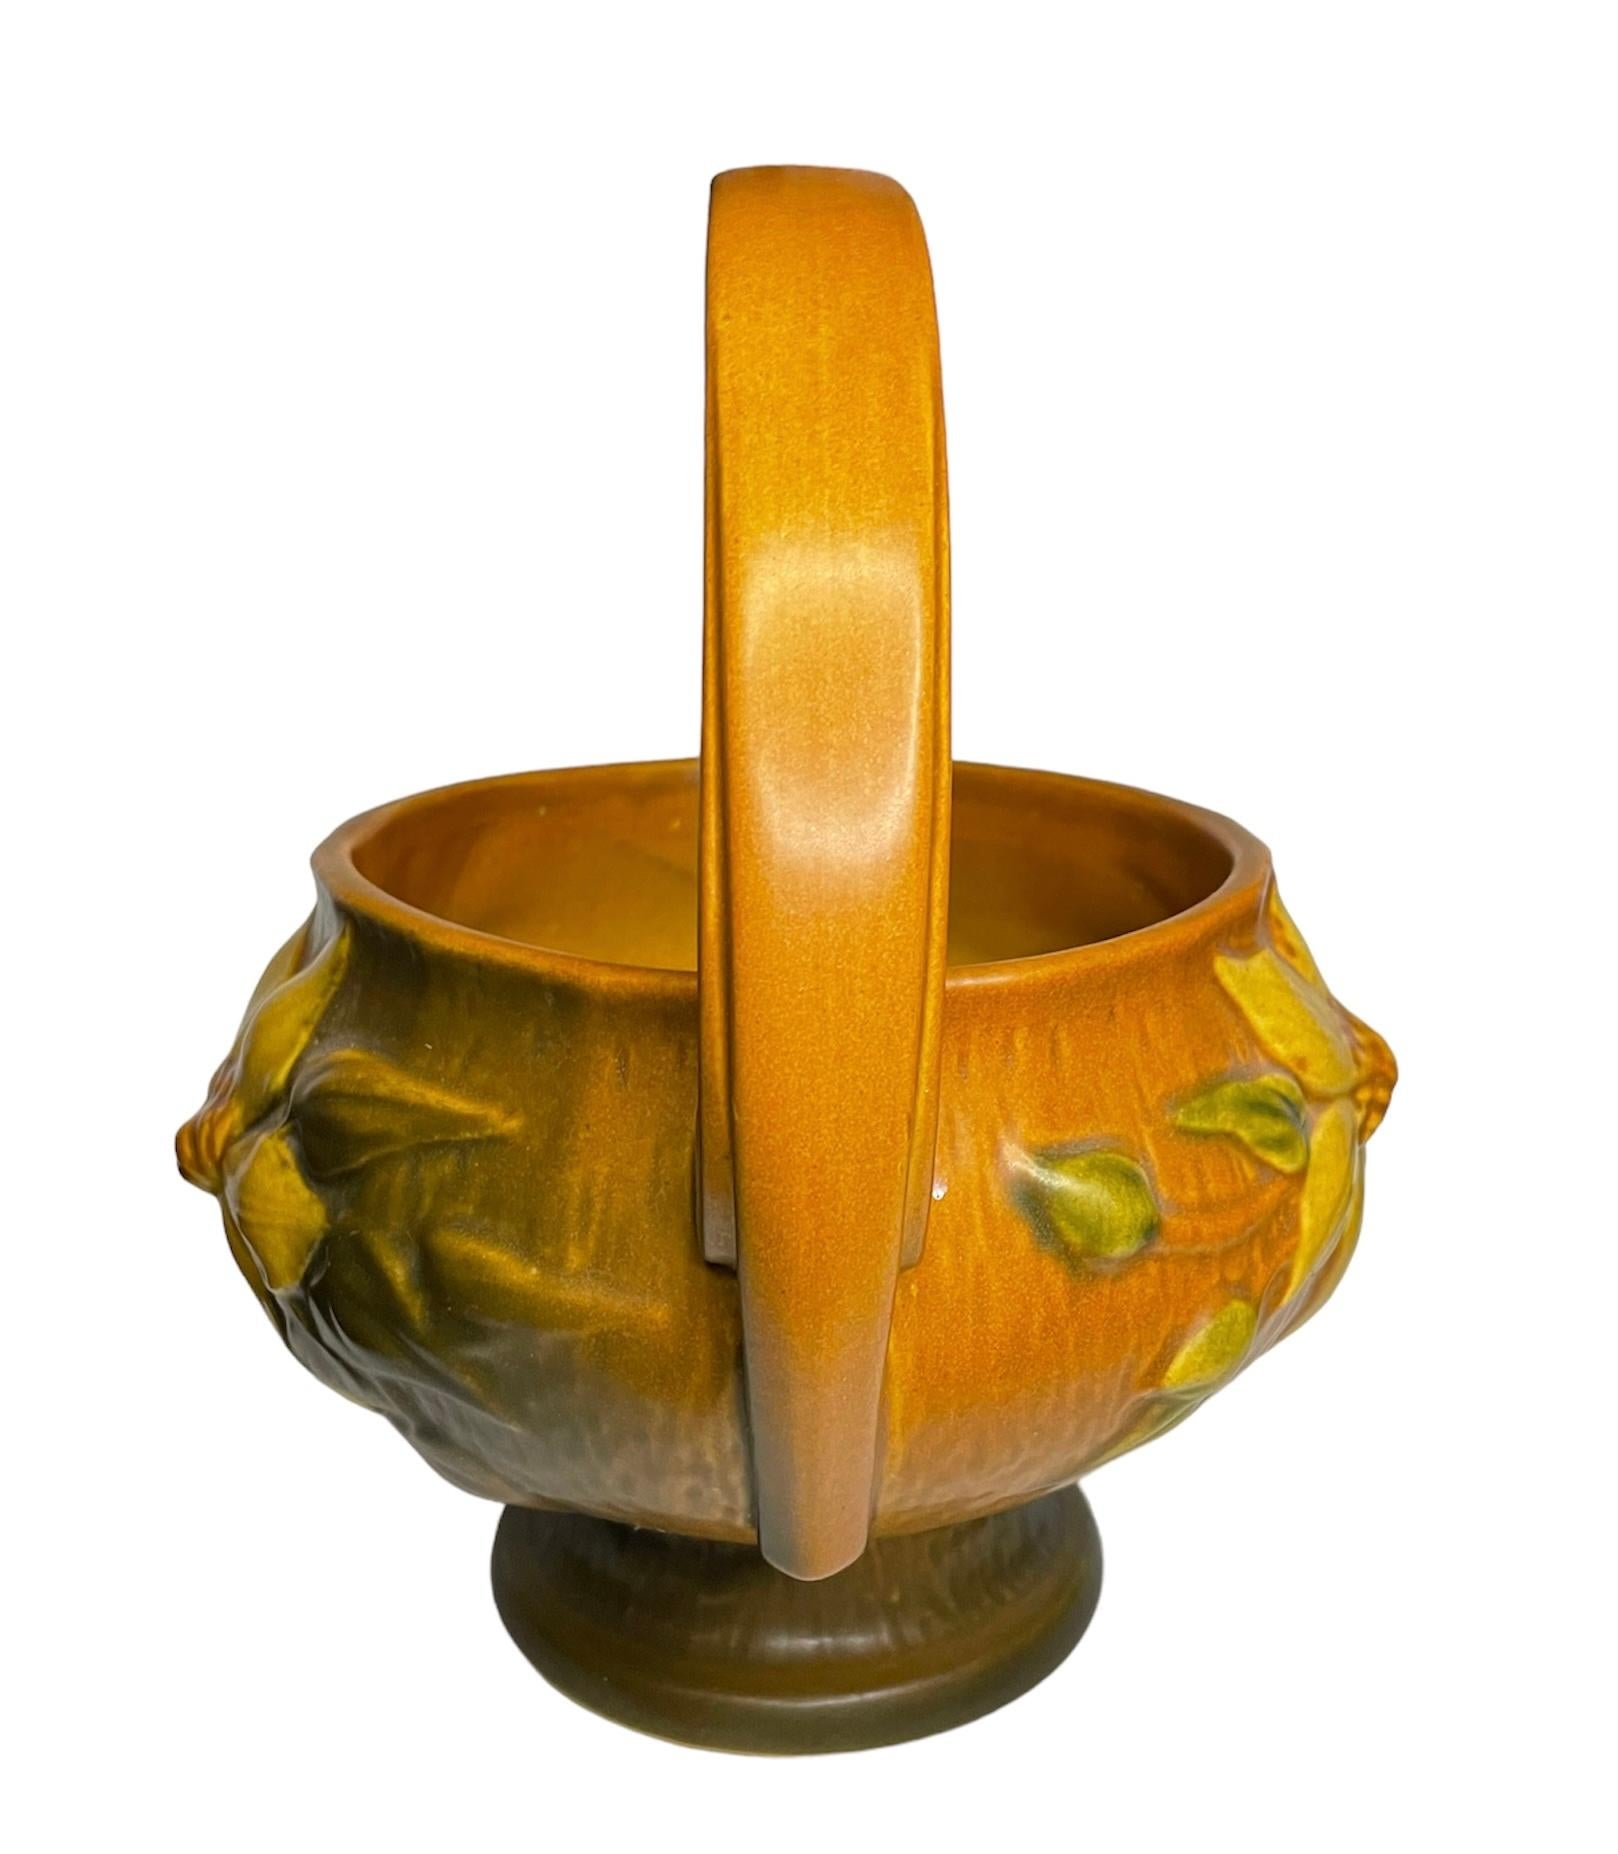 This a Roseville pottery art Clematis flower pattern basket. It depicts a brick color vase shaped as a round basket and adorned with two large yellow Clematis flowers in the front and one in the back center. At each side, there is a wide handle that